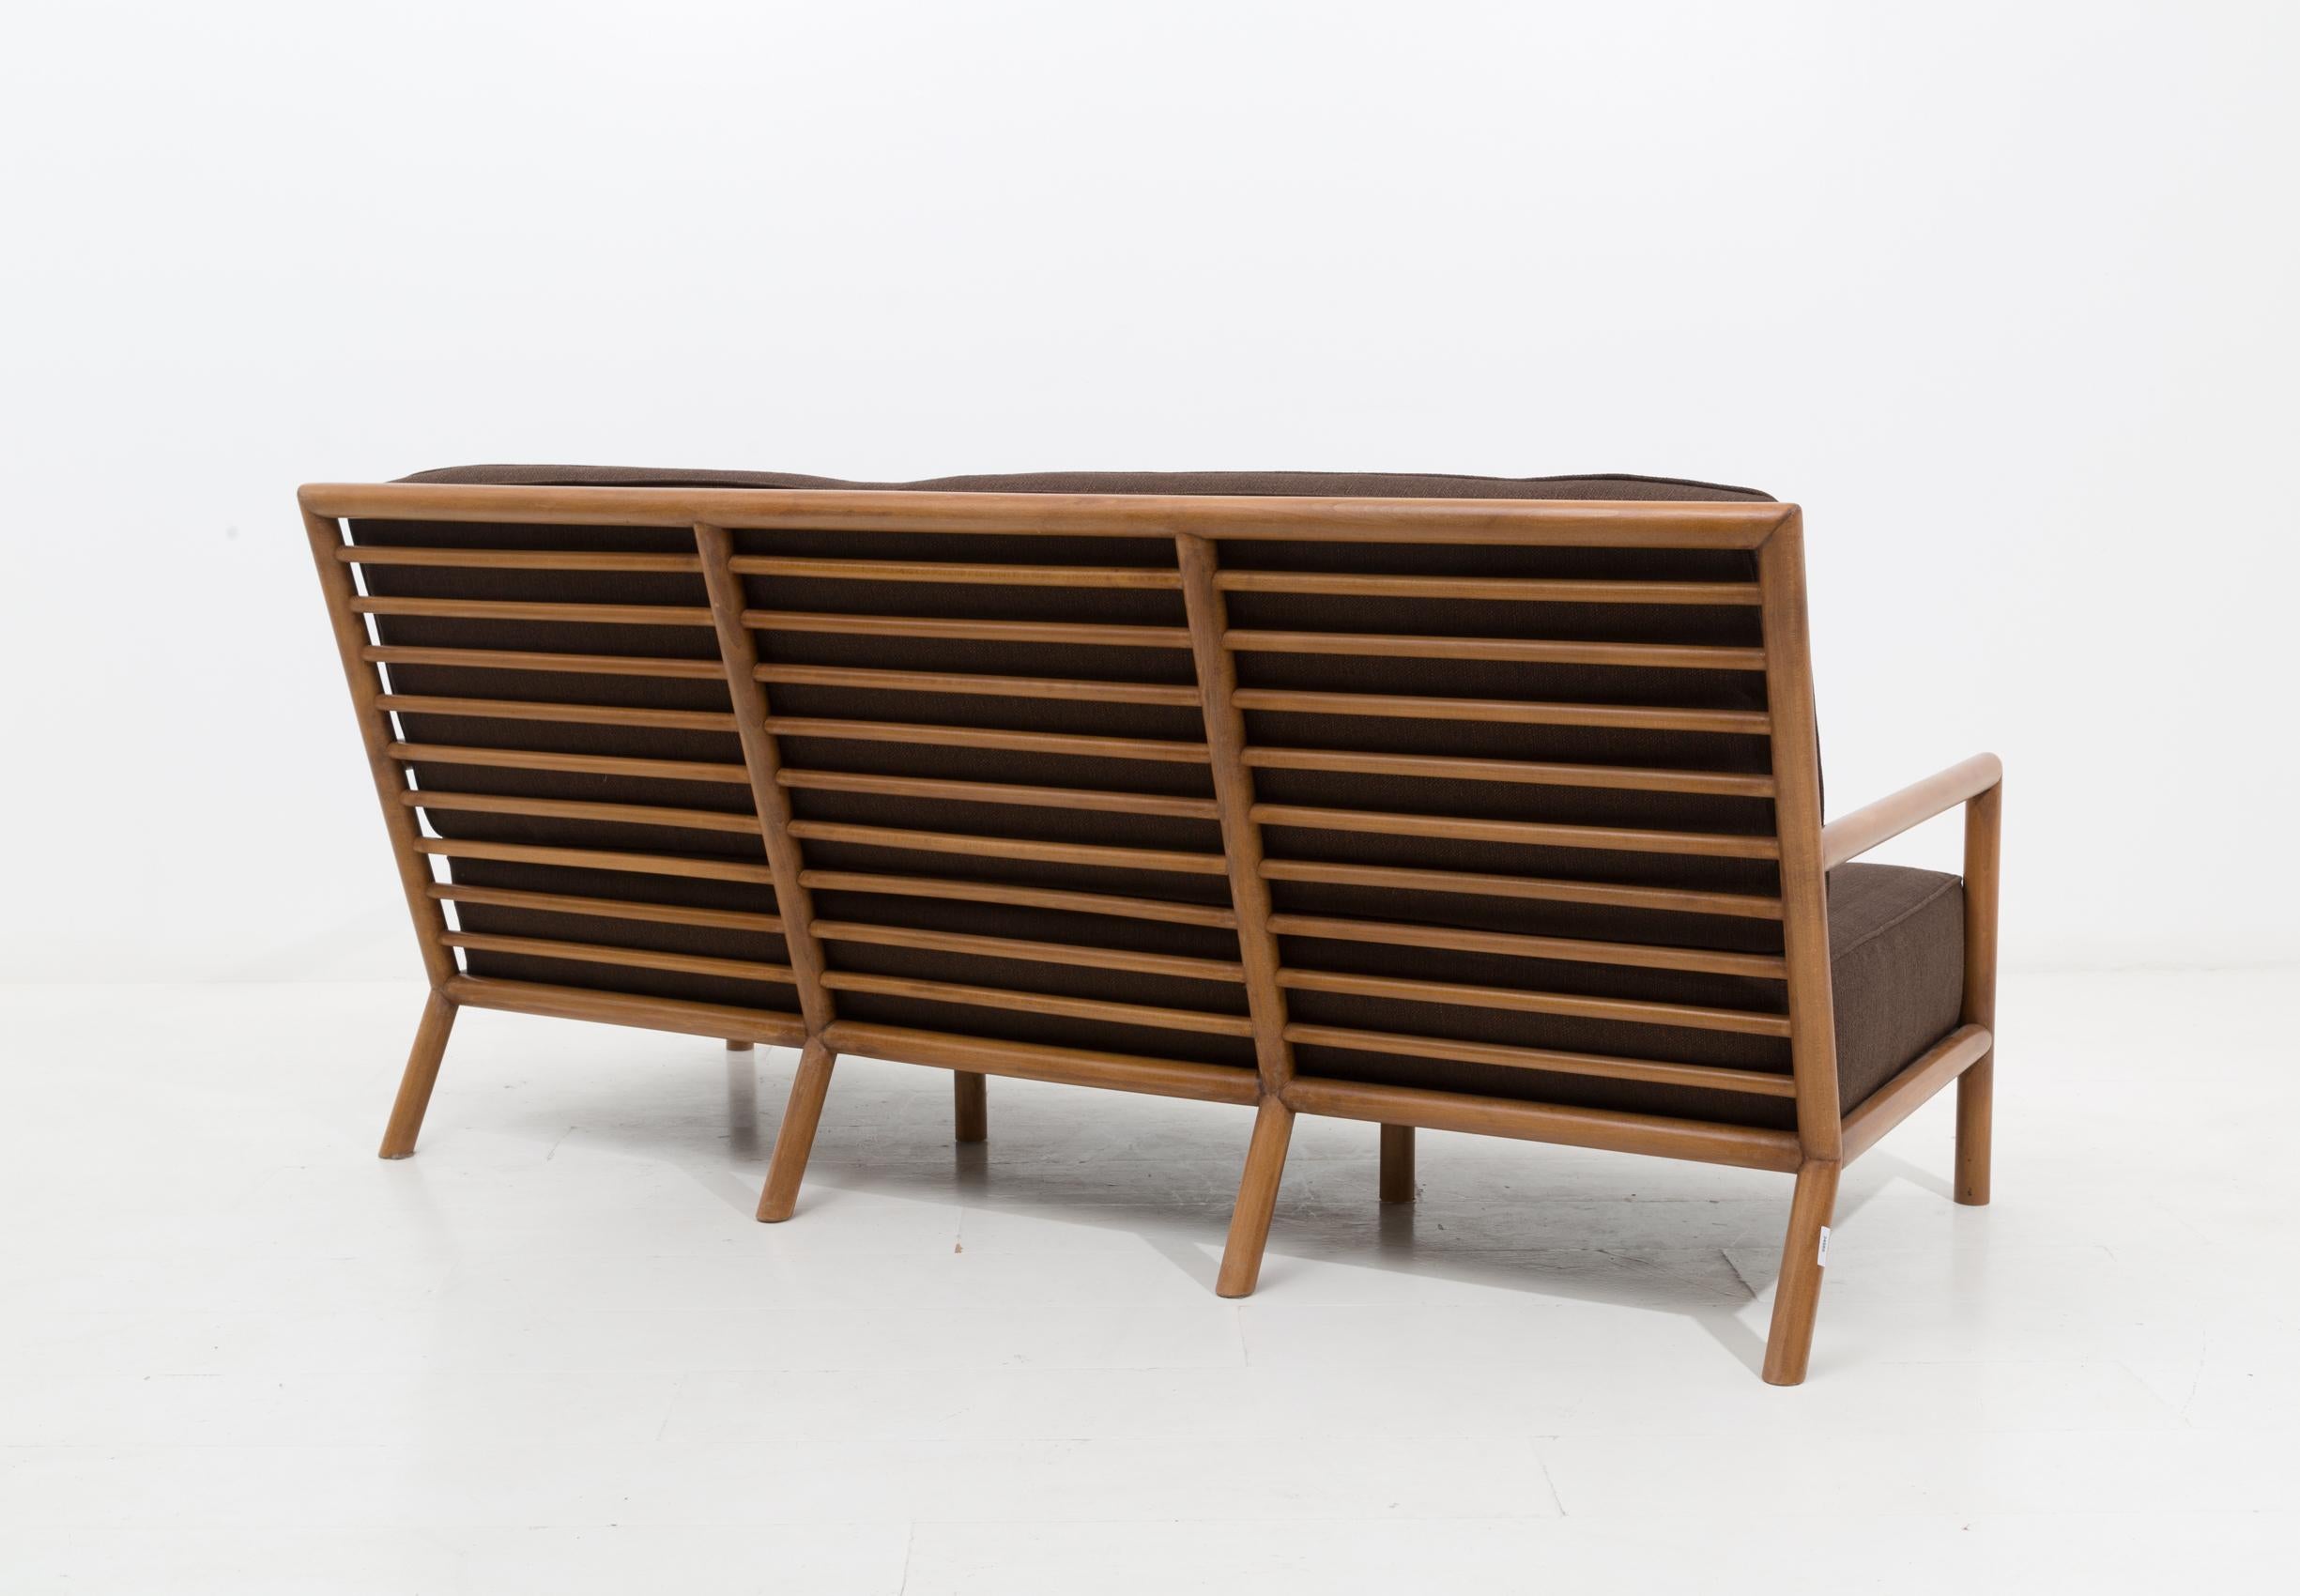 Rare and beautiful sofa designed by T.H. Robsjohn-Gibbings in 1950.
The sofa was made with light walnut wood, the back has tubular slats that make the structure more solid and comfortable. Two large cushions, which allow a soft and very comfortable